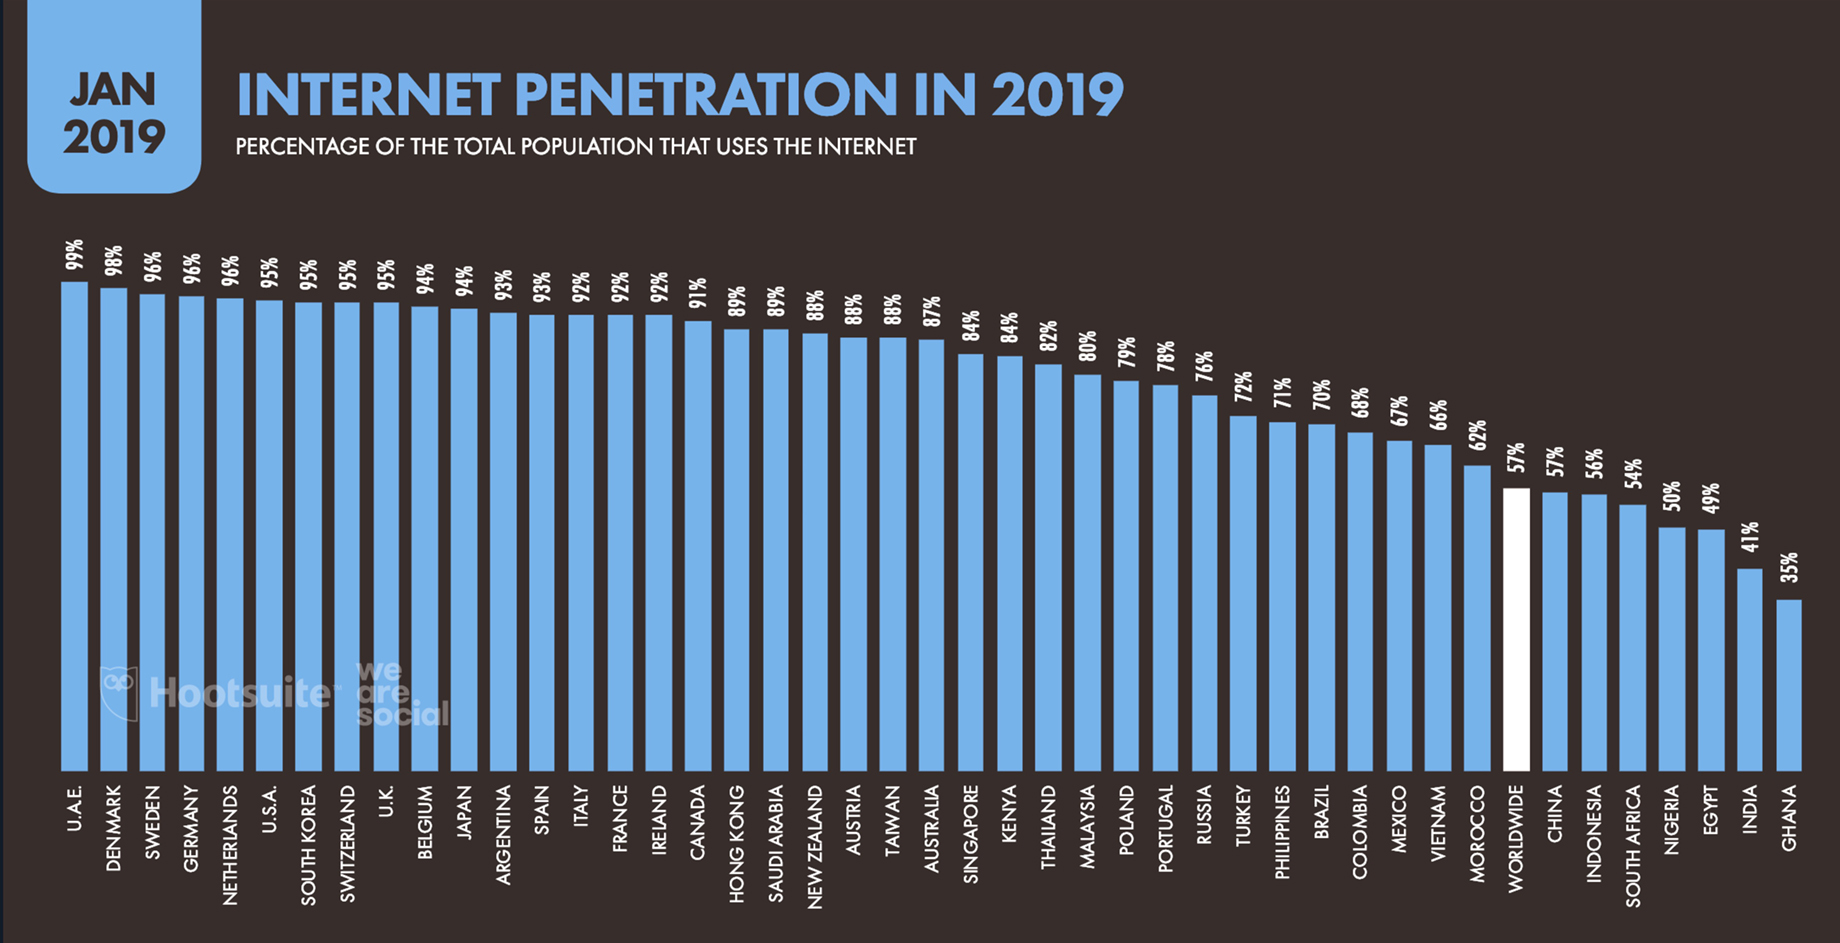 Internet Penetration Worldwide in 2019 – Percentage of the Total Population that uses the Internet